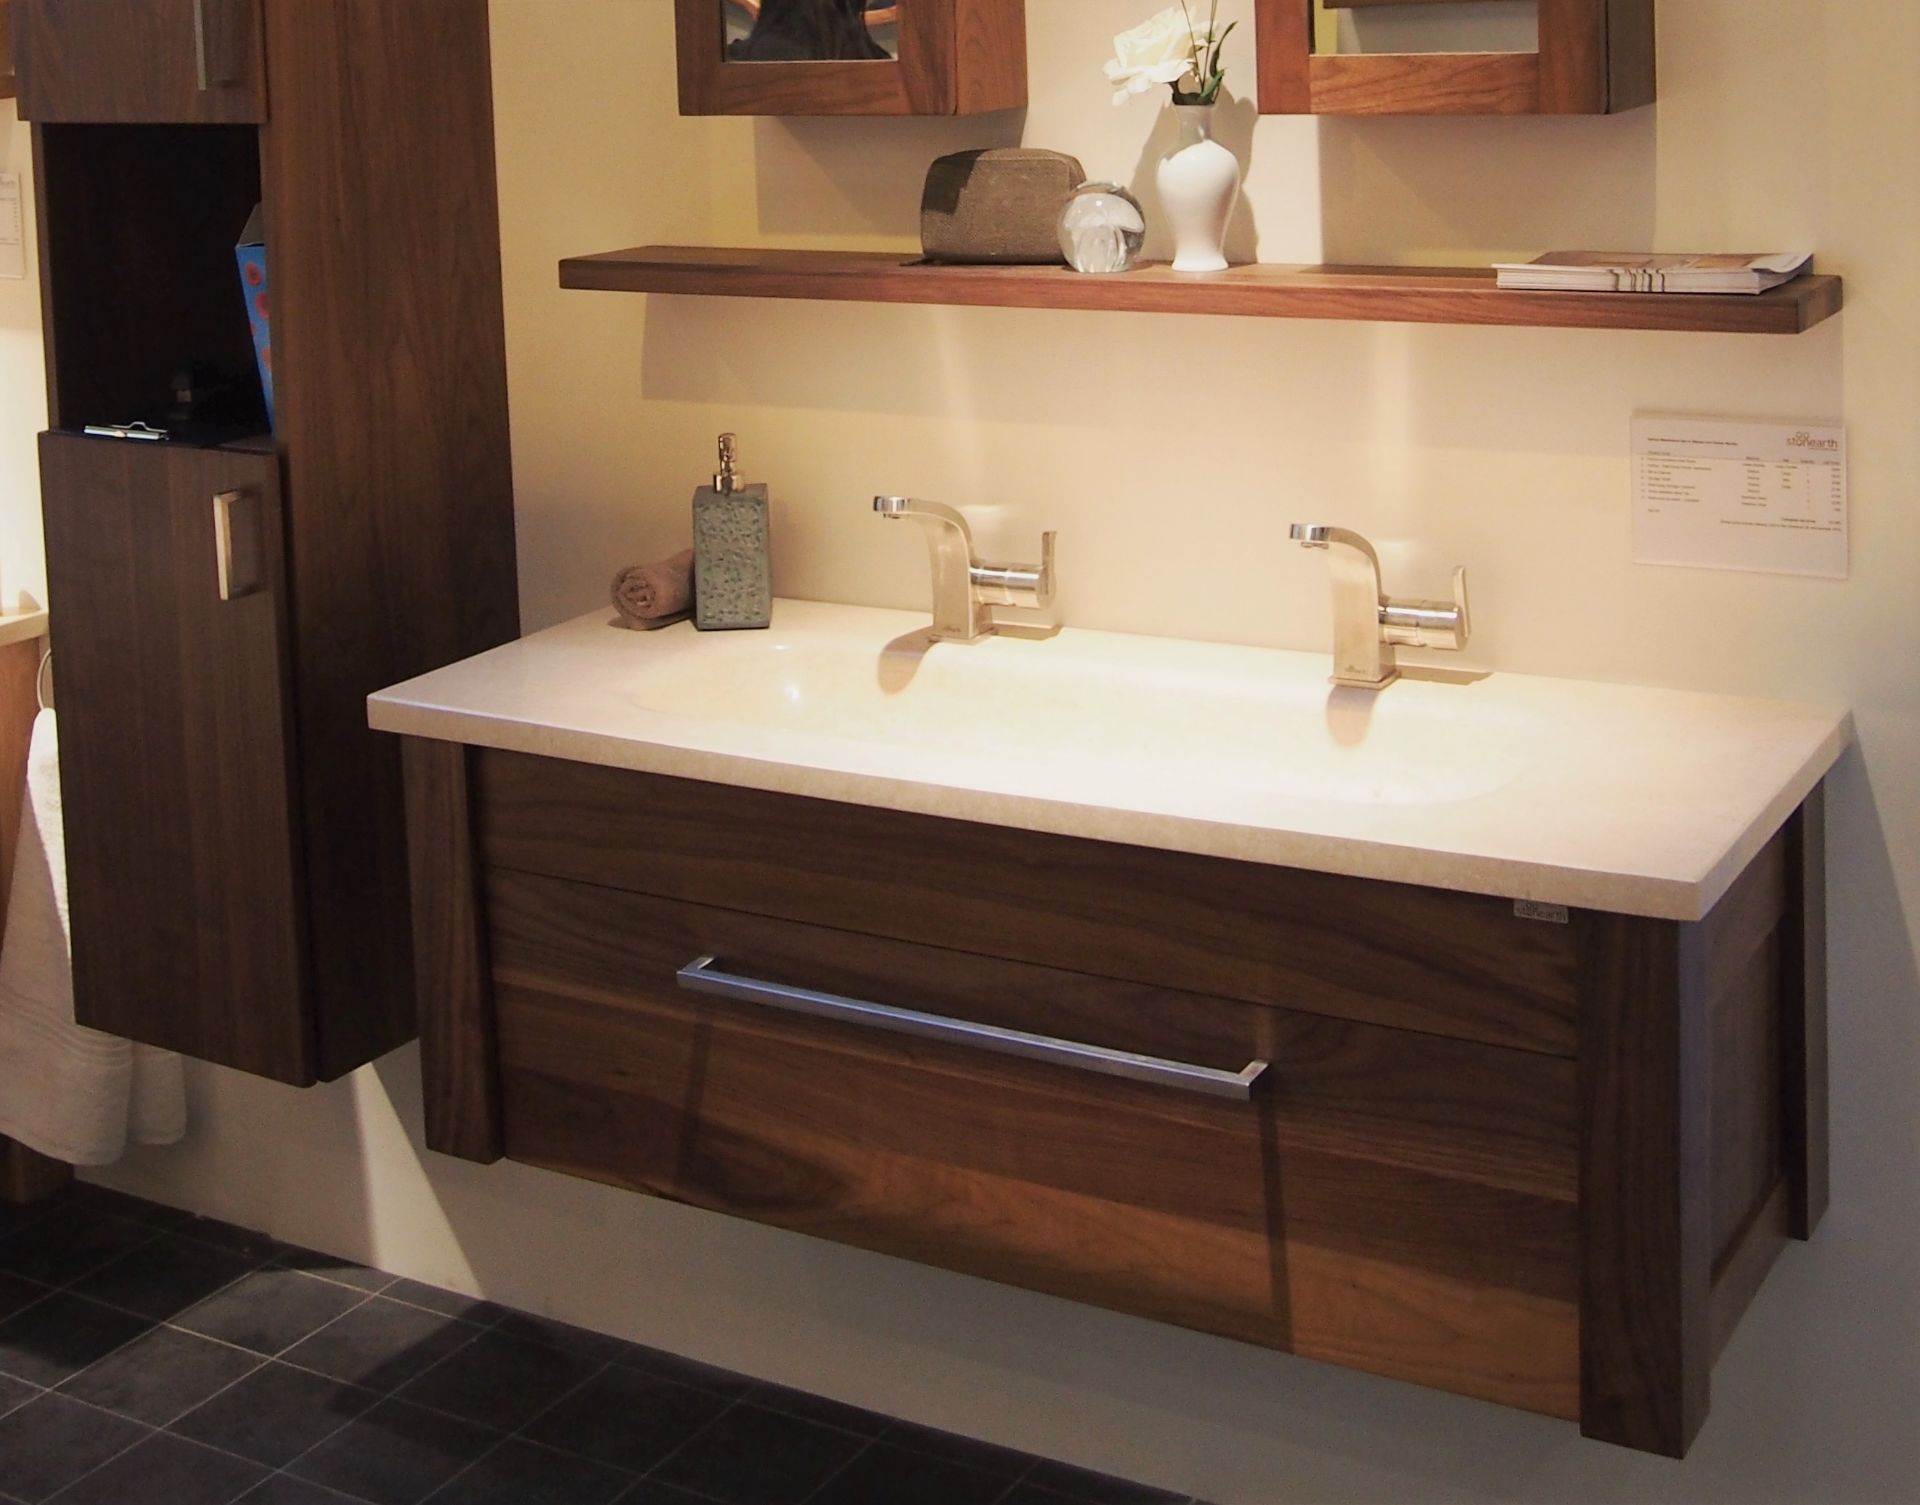 1 x Stonearth 'Venice' Wall Mounted 1200mm Washstand - American Solid Walnut - Original RRP £1,270 - Image 2 of 9